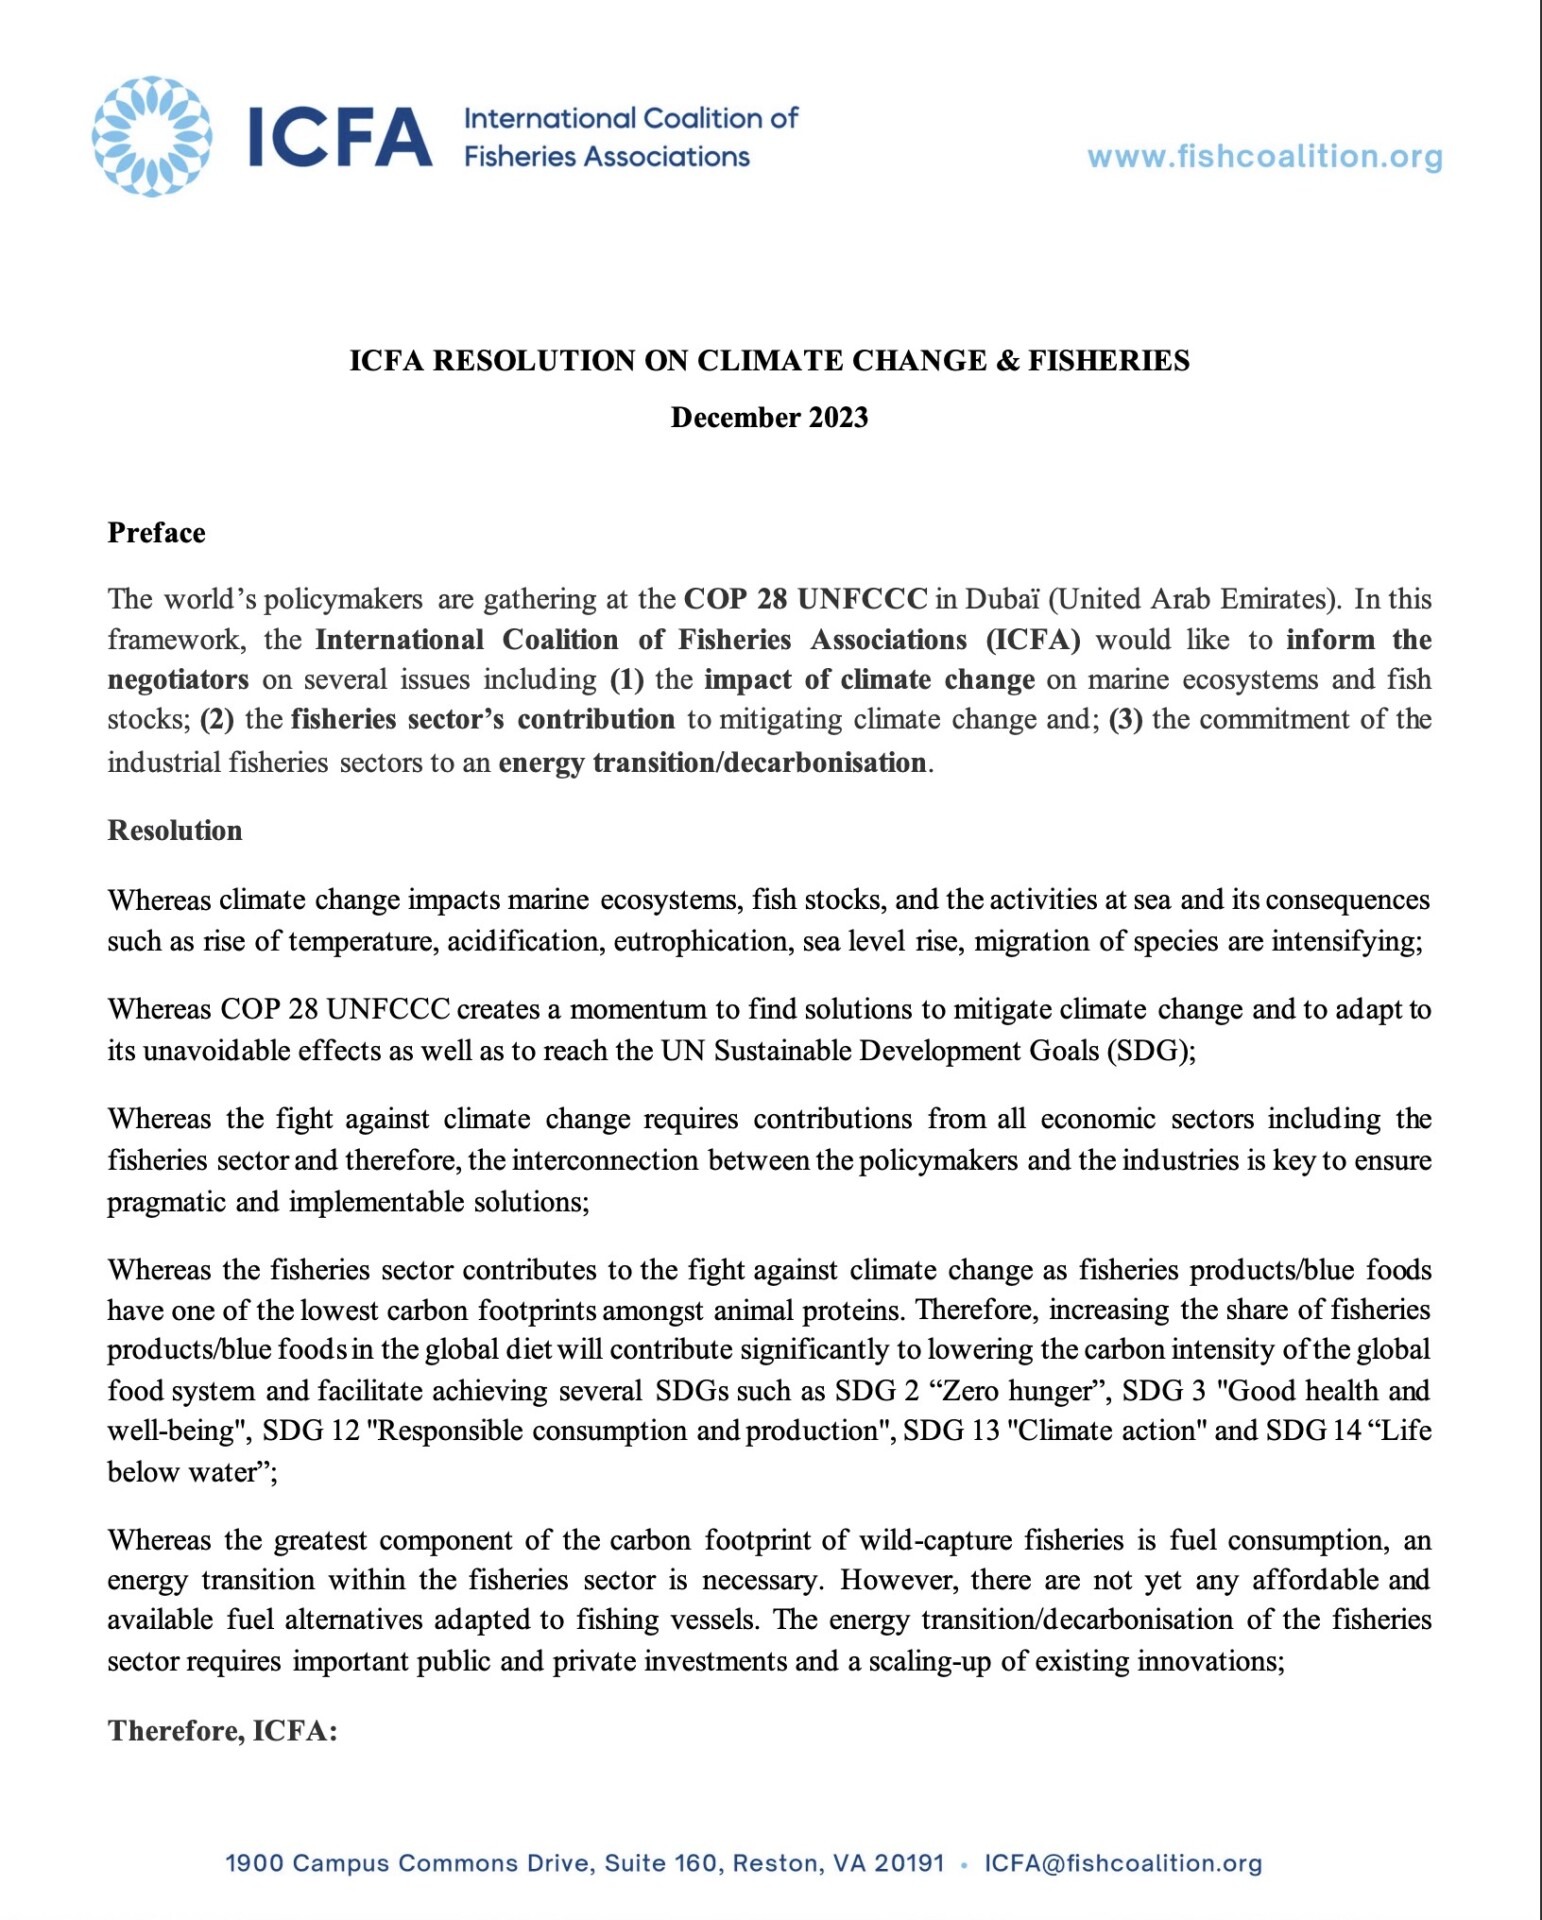 Official ICFA Resolution regarding Climate Change and Fisheries